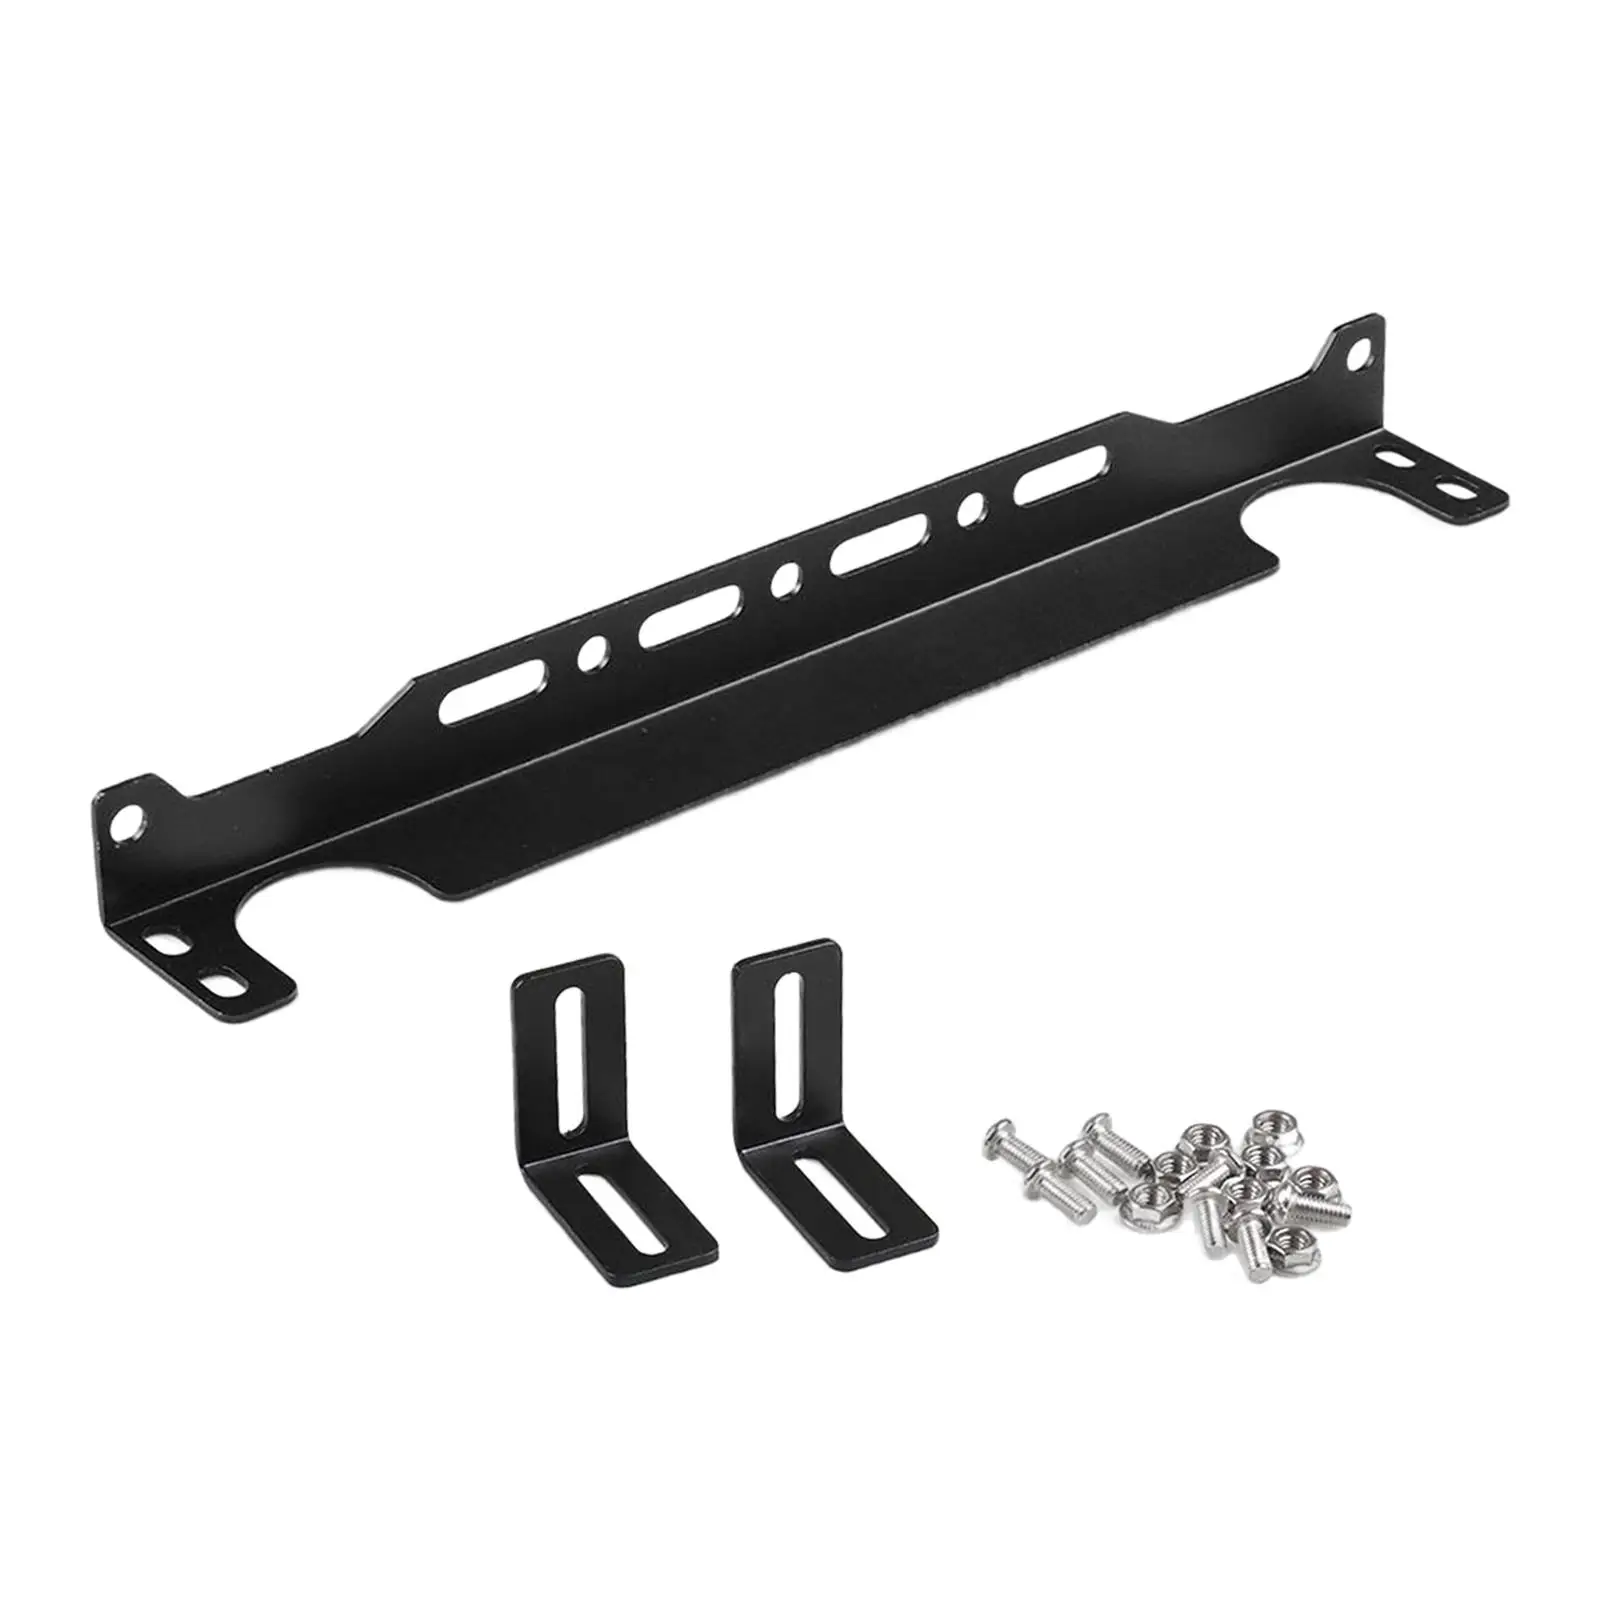 Universal Oil Cooler Mounting Bracket Kit 34cm/13.4in Accessories Professional High Performance High Quality Durable